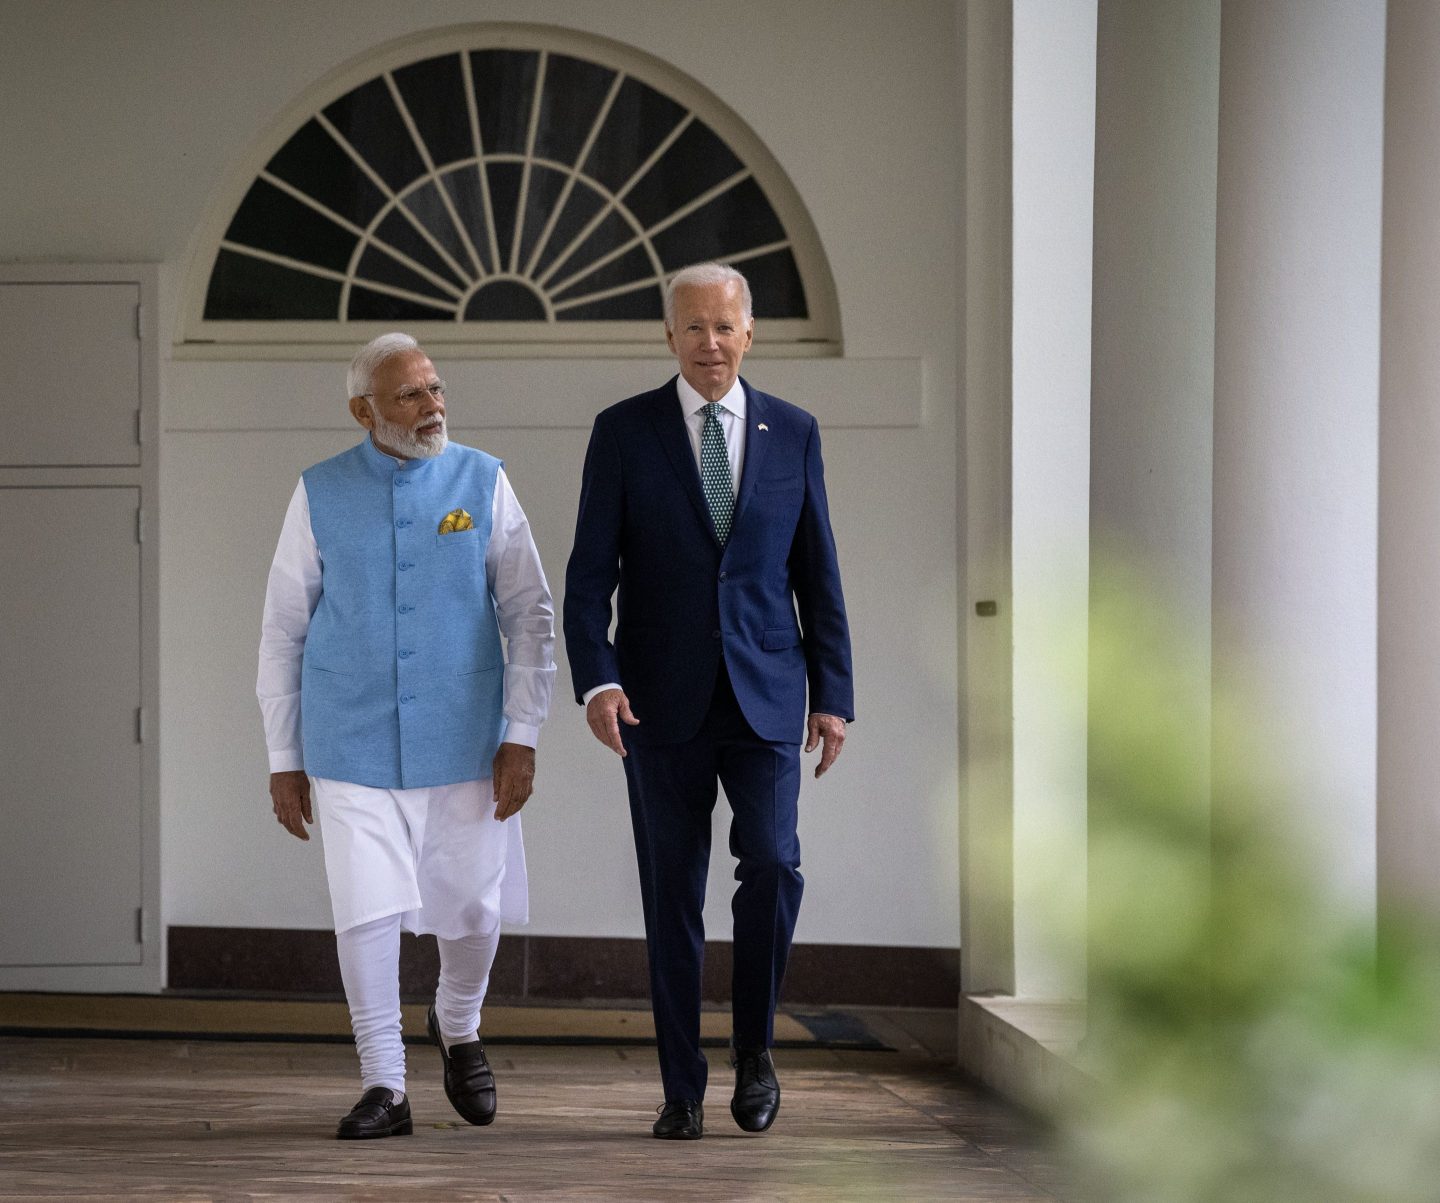 WASHINGTON, DC - JUNE 22: 
President Biden walks with Prime Minister Narendra Modi of India towards the Oval Office during an Official State Visit in Washington, DC. 
(Photo by Bill O&#039;Leary/The Washington Post via Getty Images)